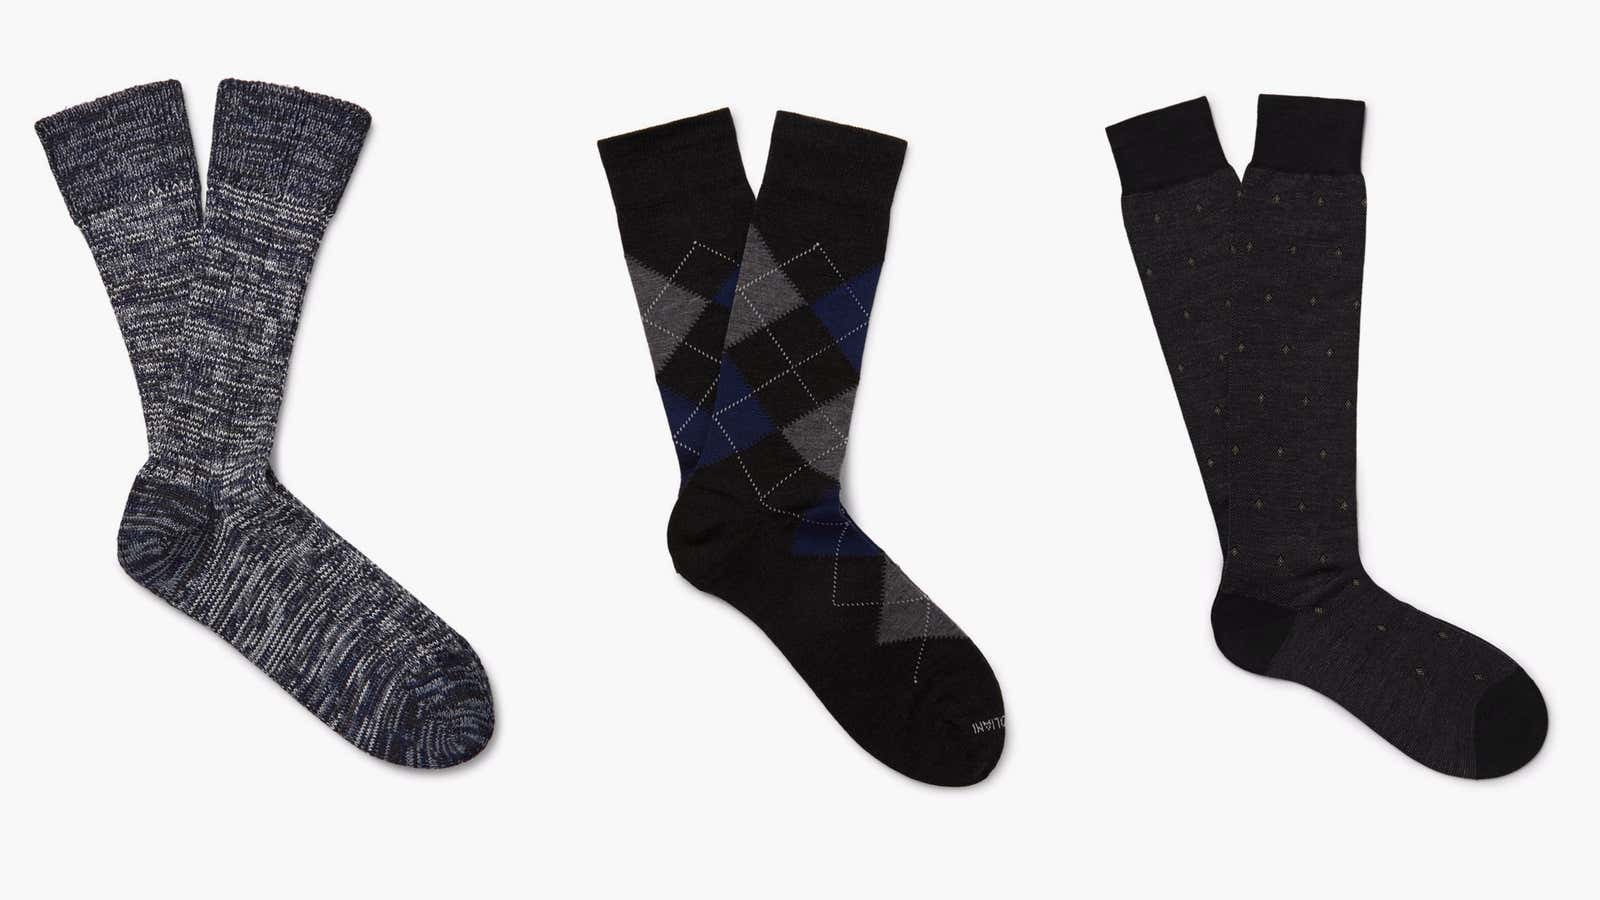 If you think socks aren’t a great gift then you’re not giving the right ones.